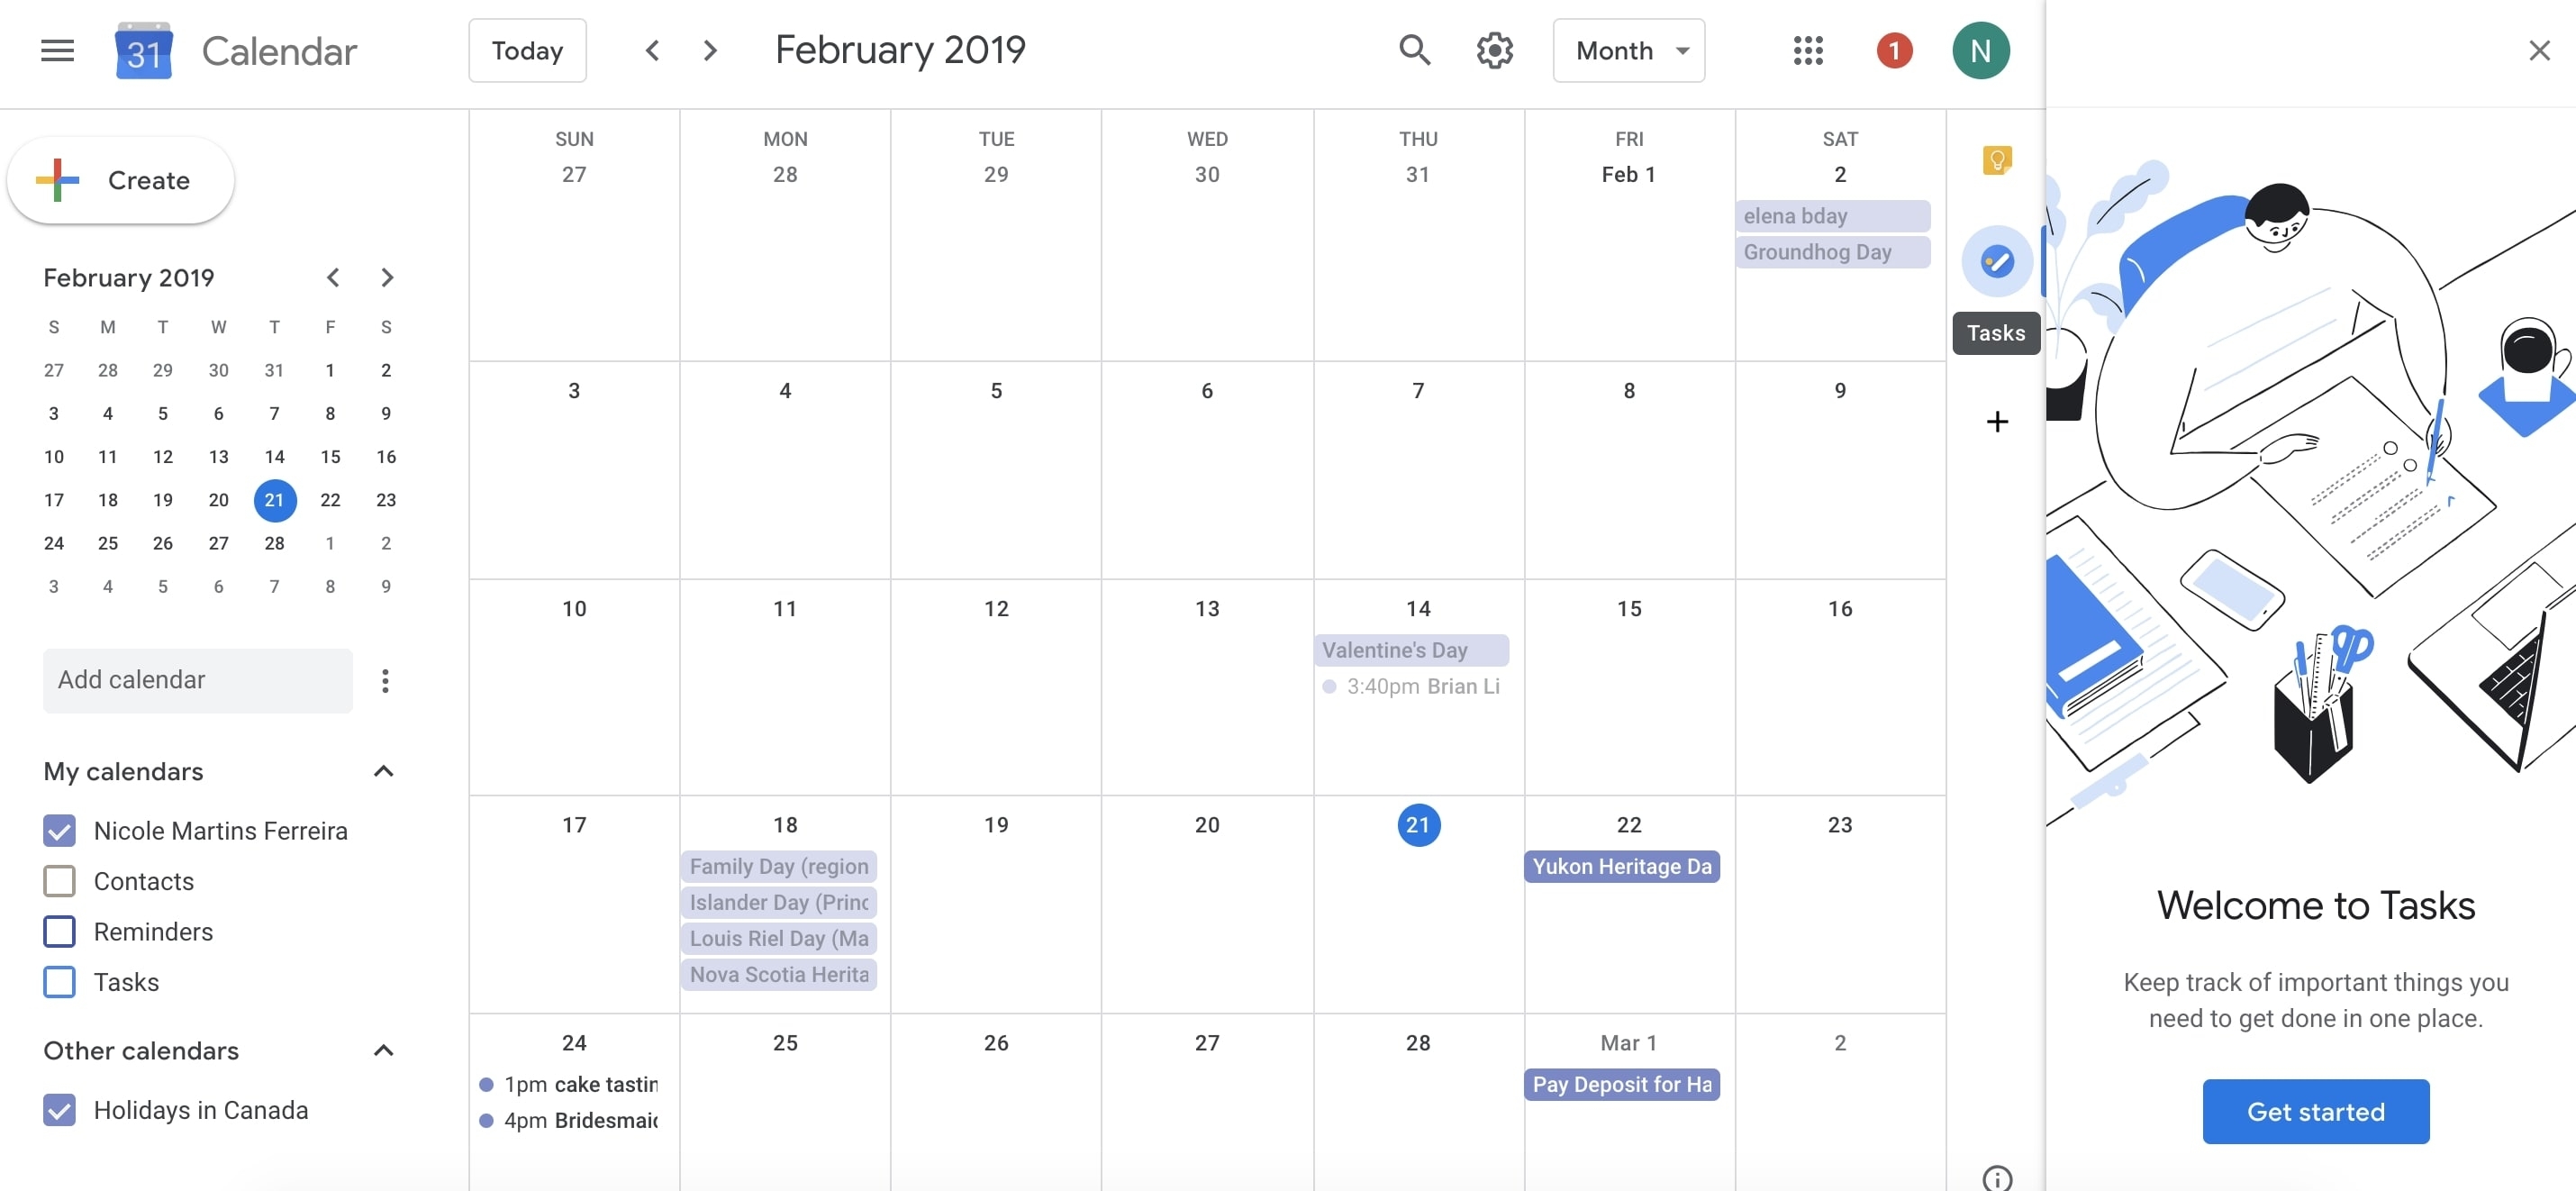 20 Ways To Use Google Calendar To Maximize Your Day In 2019